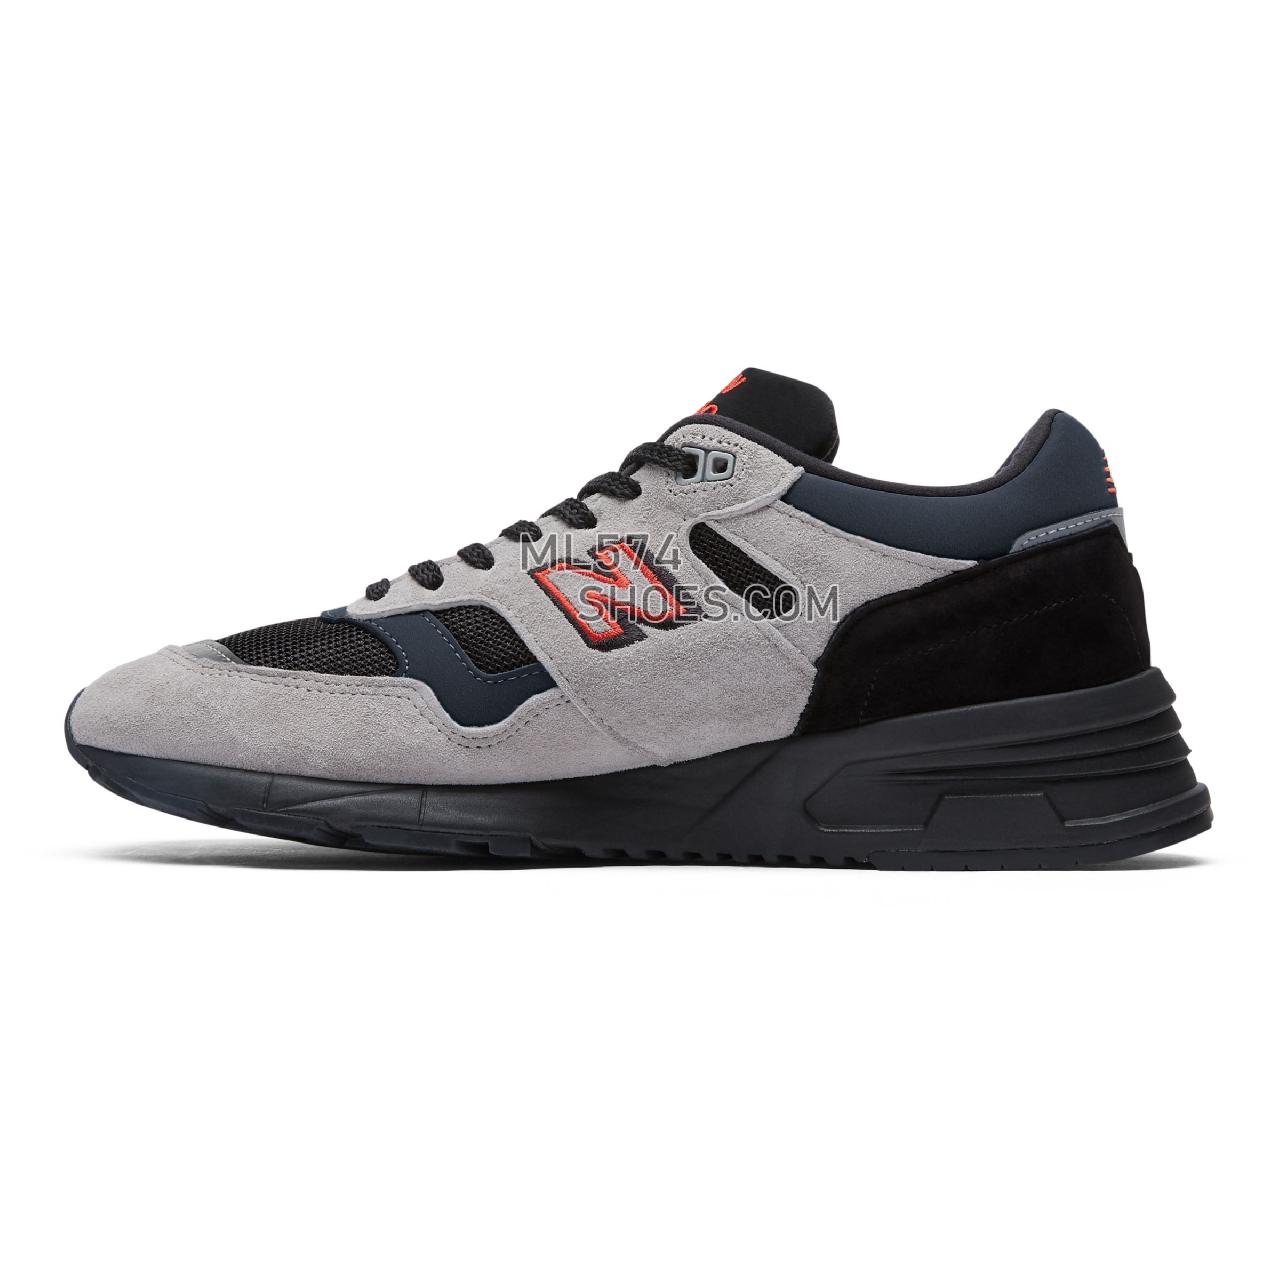 New Balance Made in UK 1530 - Men's Made in UK 1530 - Grey with Black and Red - M1530VA